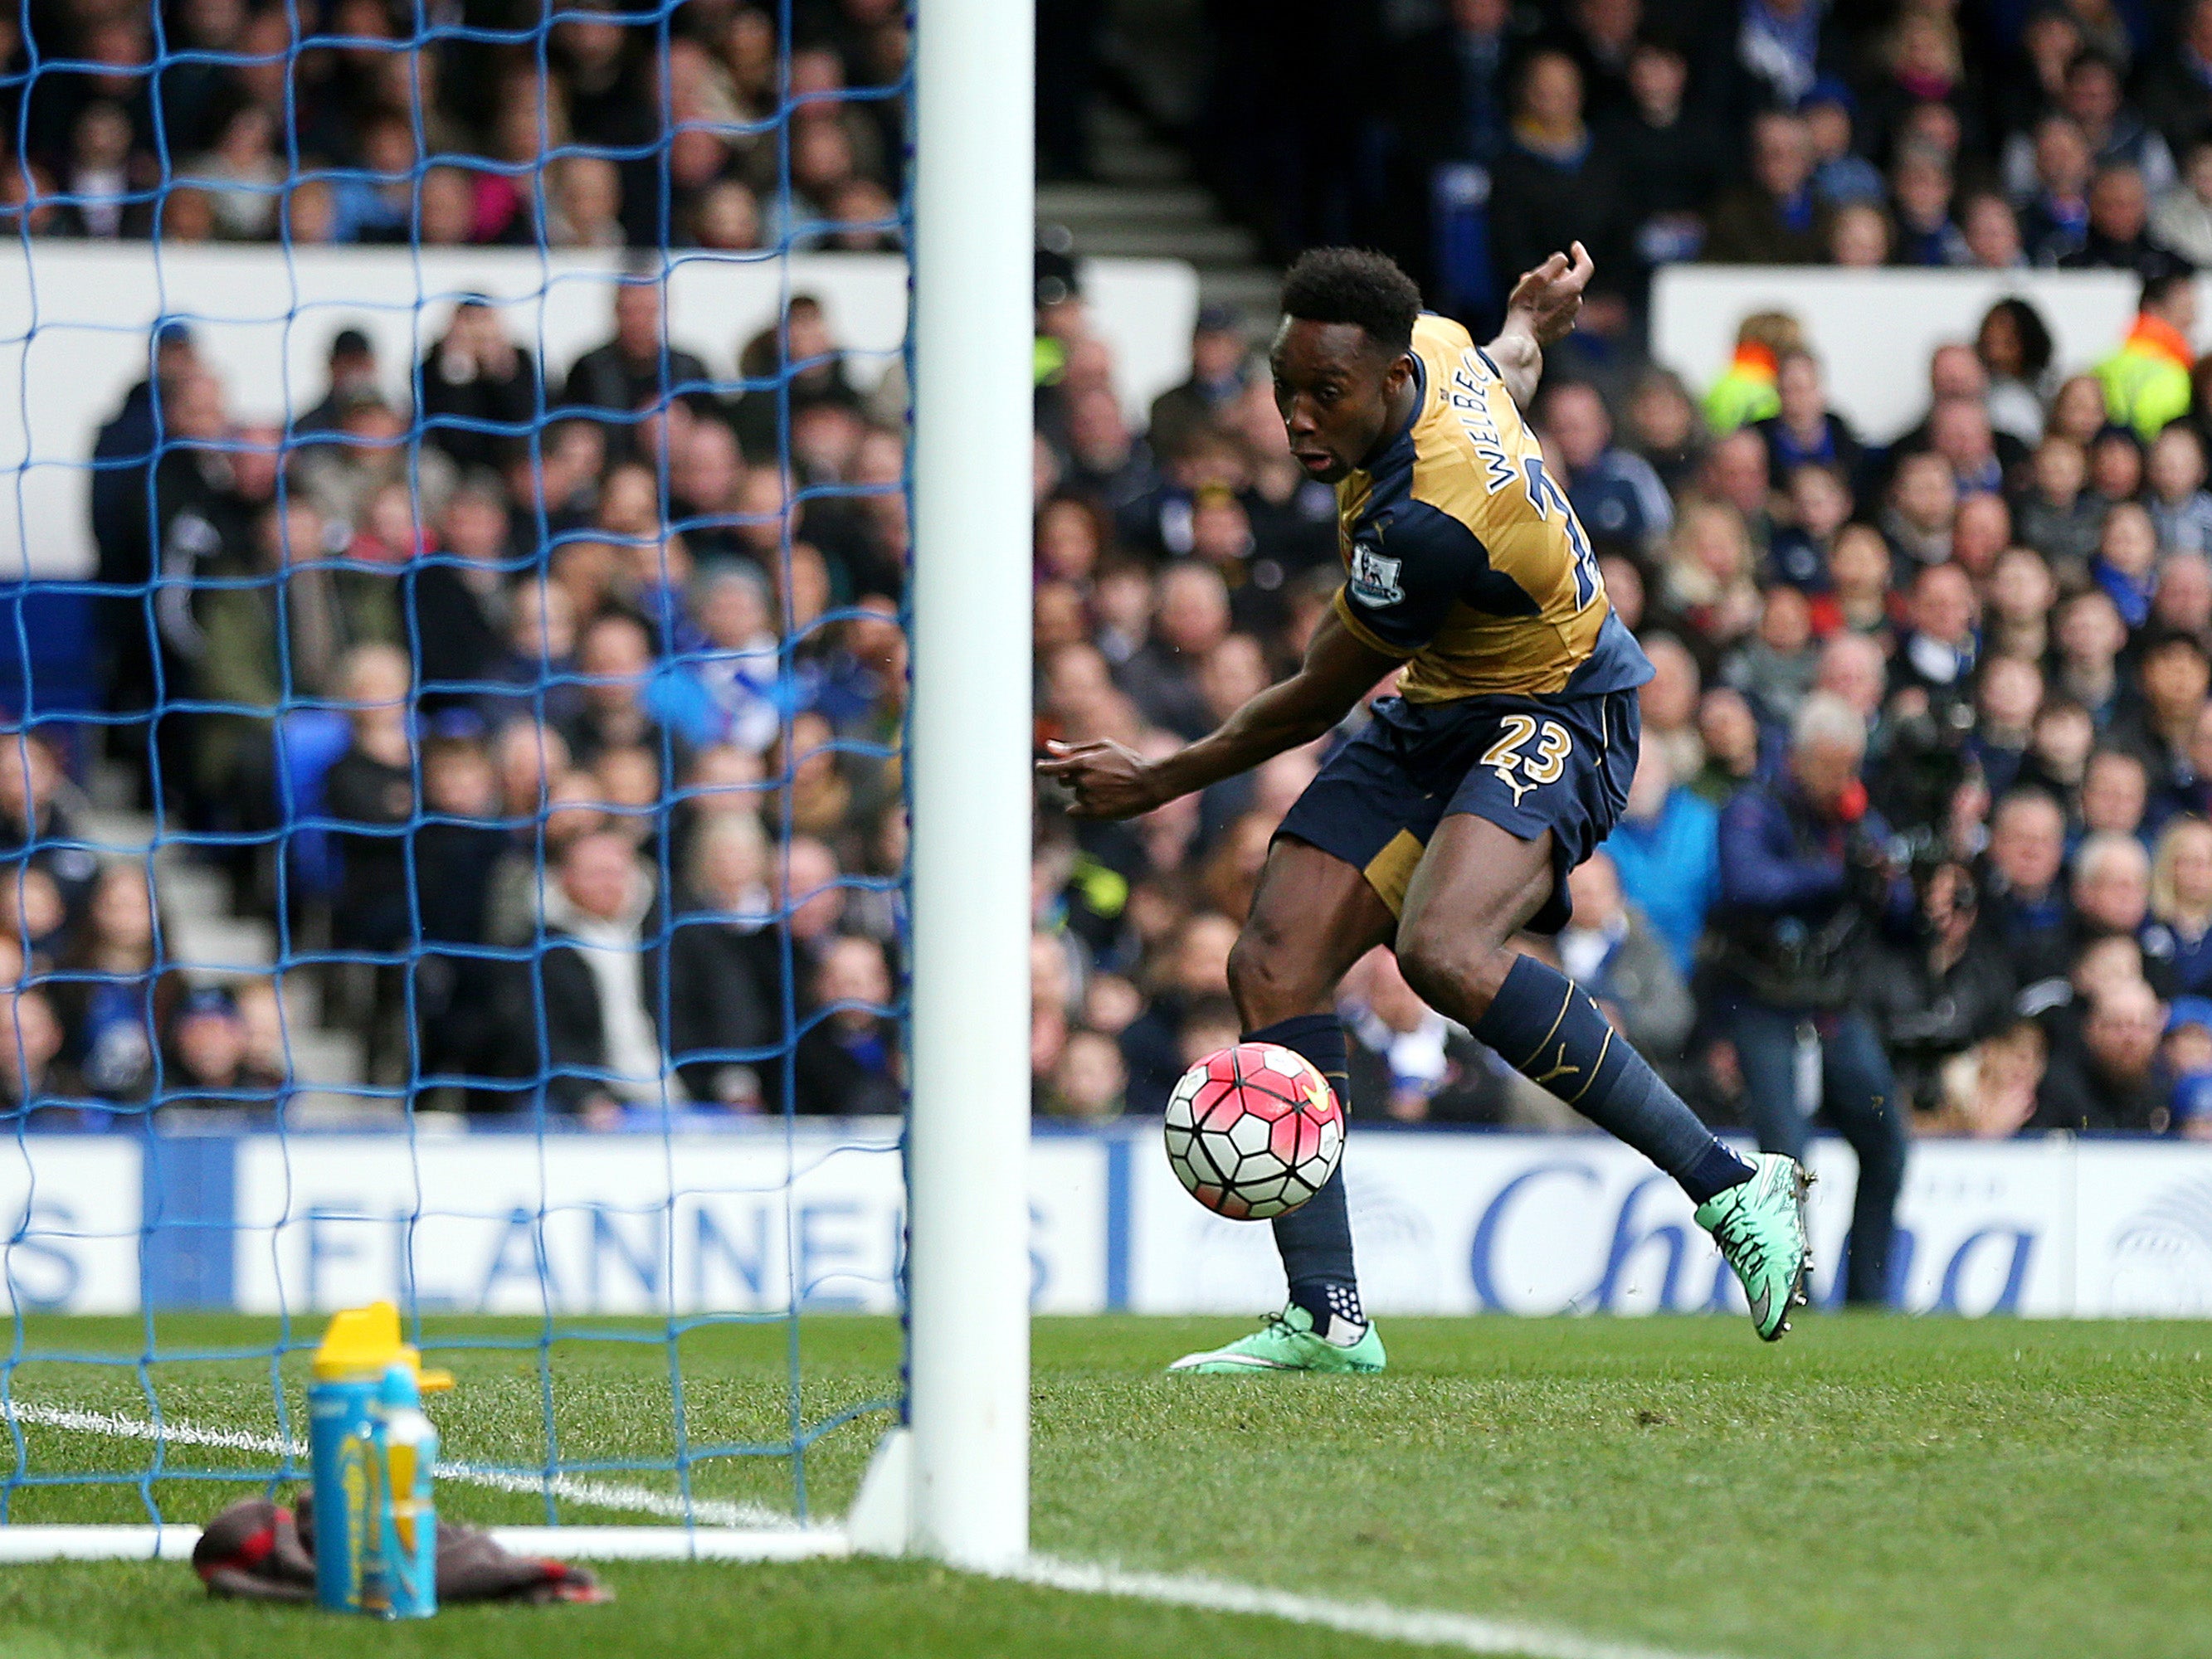 Danny Welbeck applies a finish to open the scoring